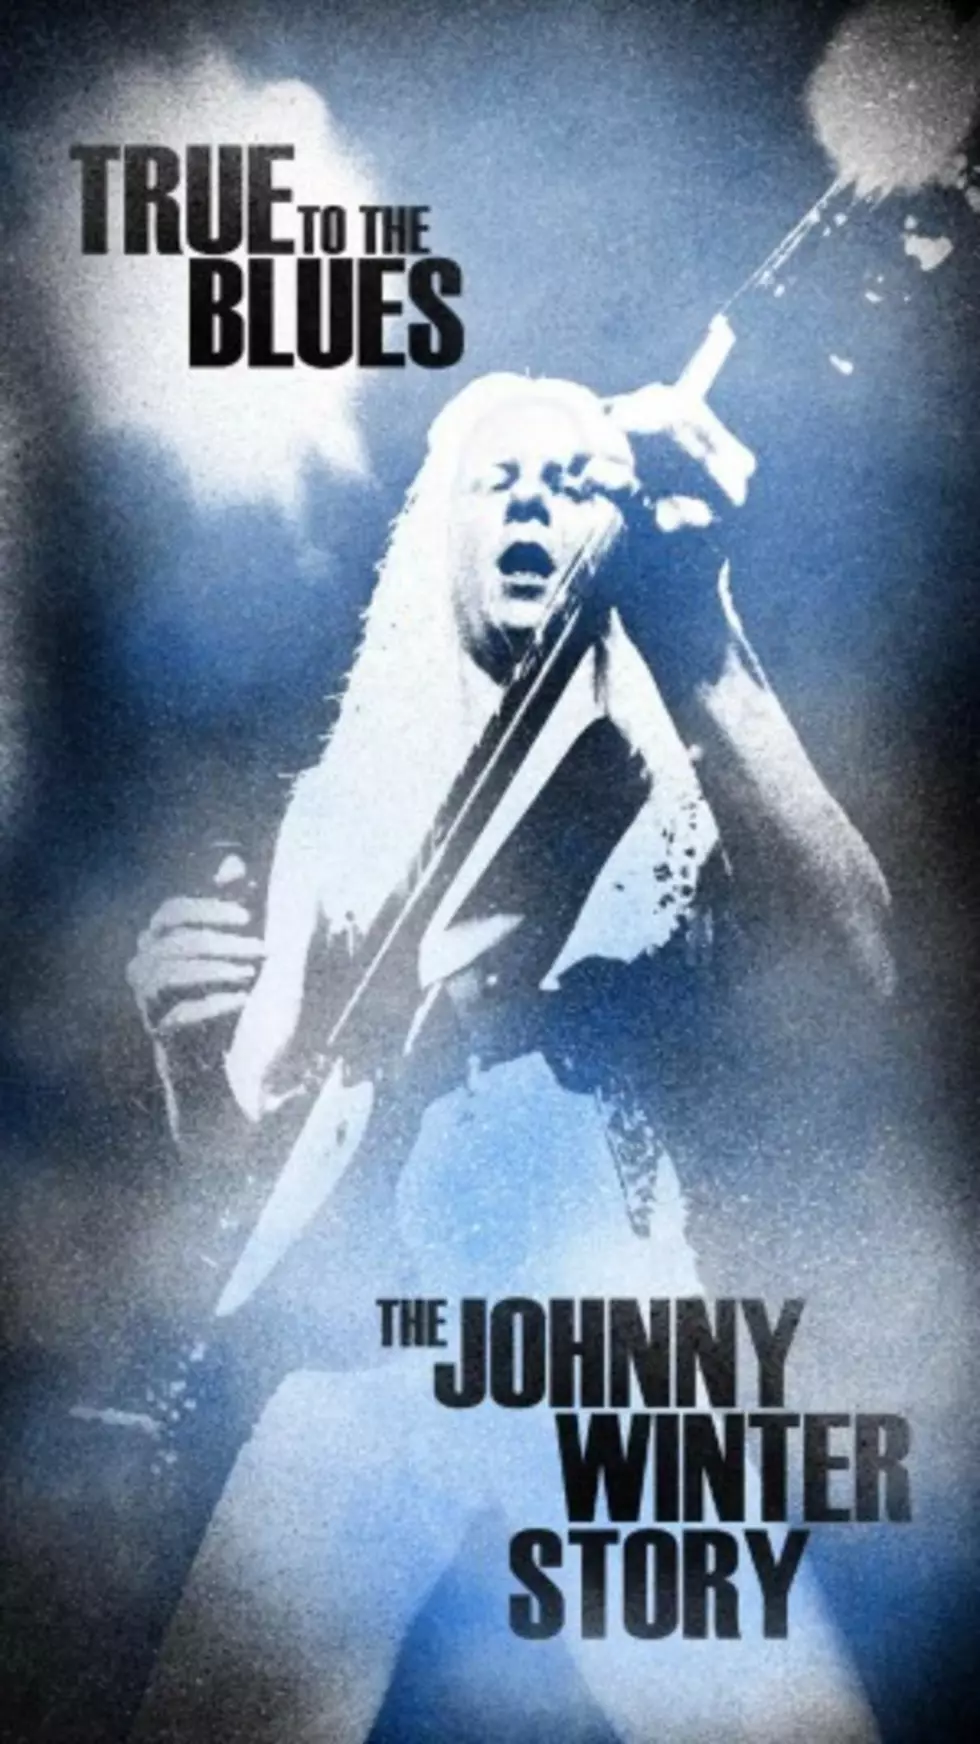 Johnny Winter, ‘True to the Blues: The Johnny Winter Story’ – Album Review